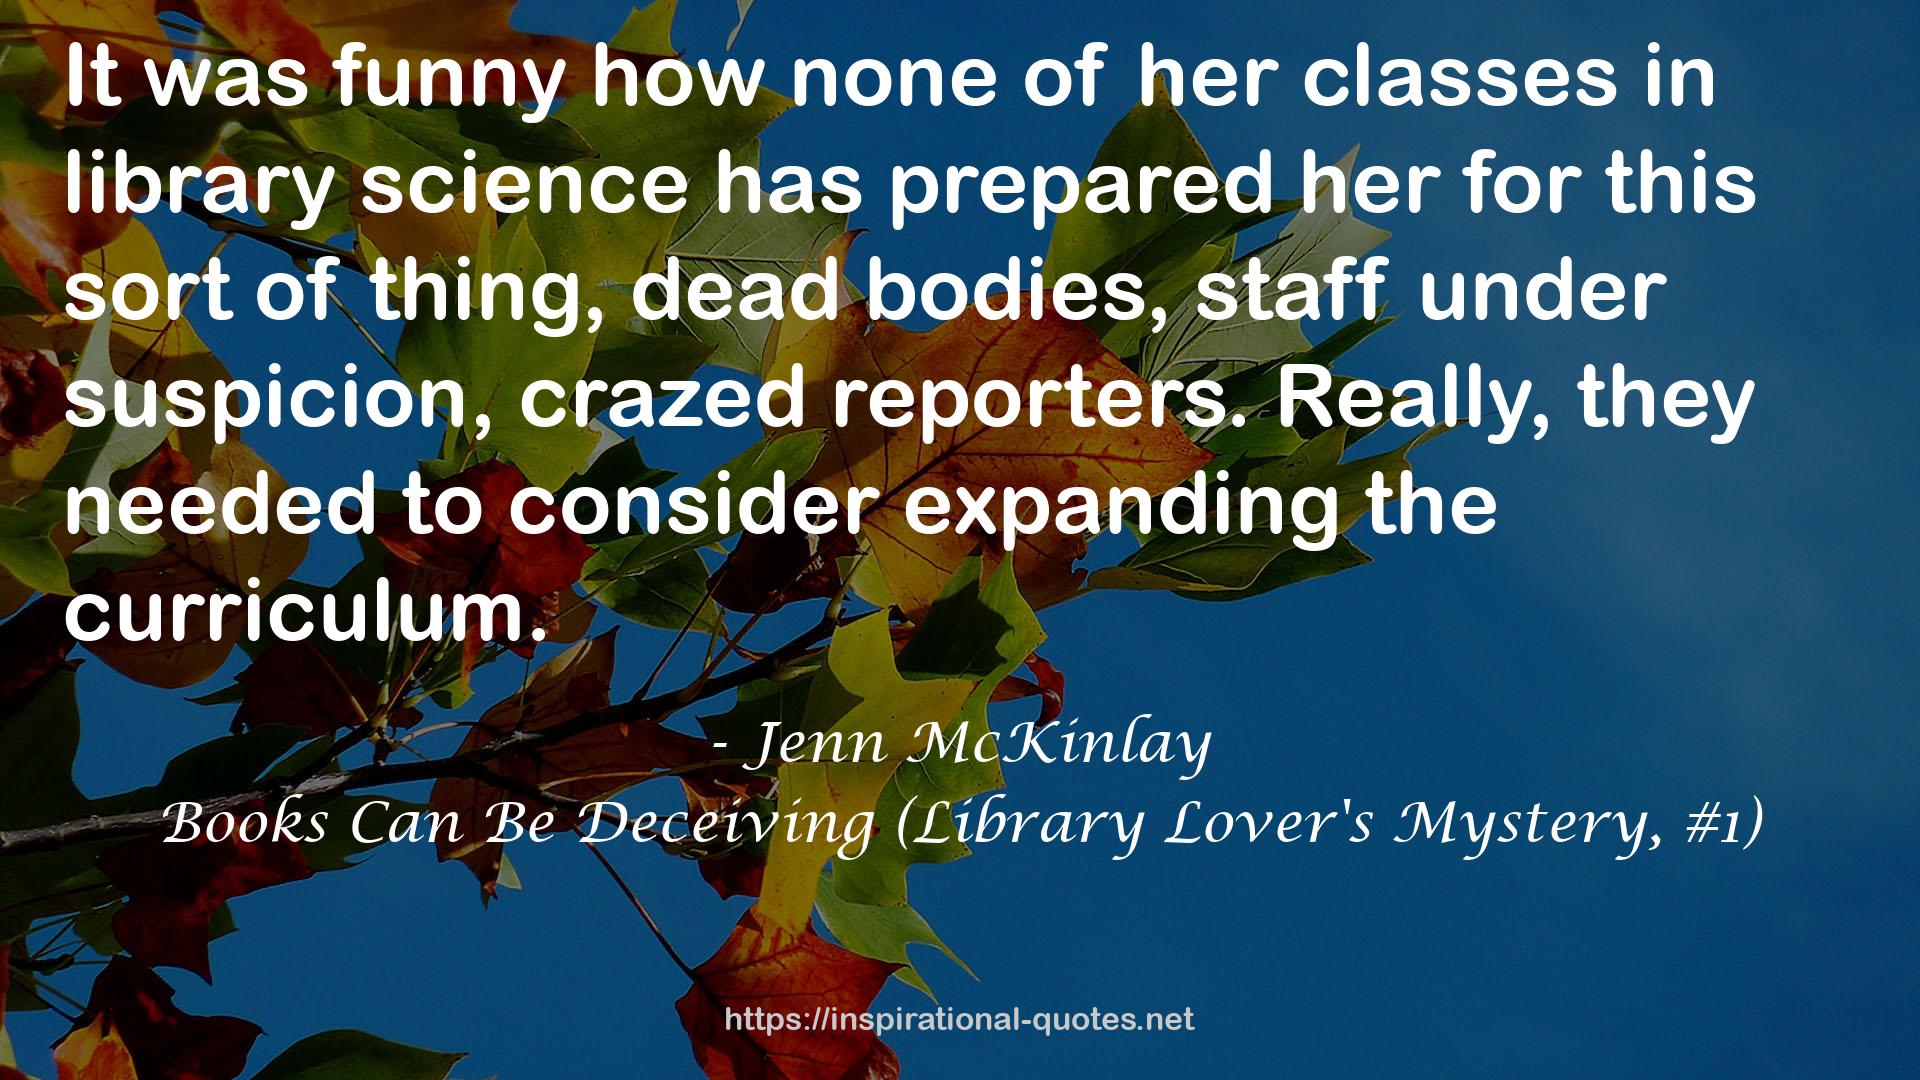 Books Can Be Deceiving (Library Lover's Mystery, #1) QUOTES